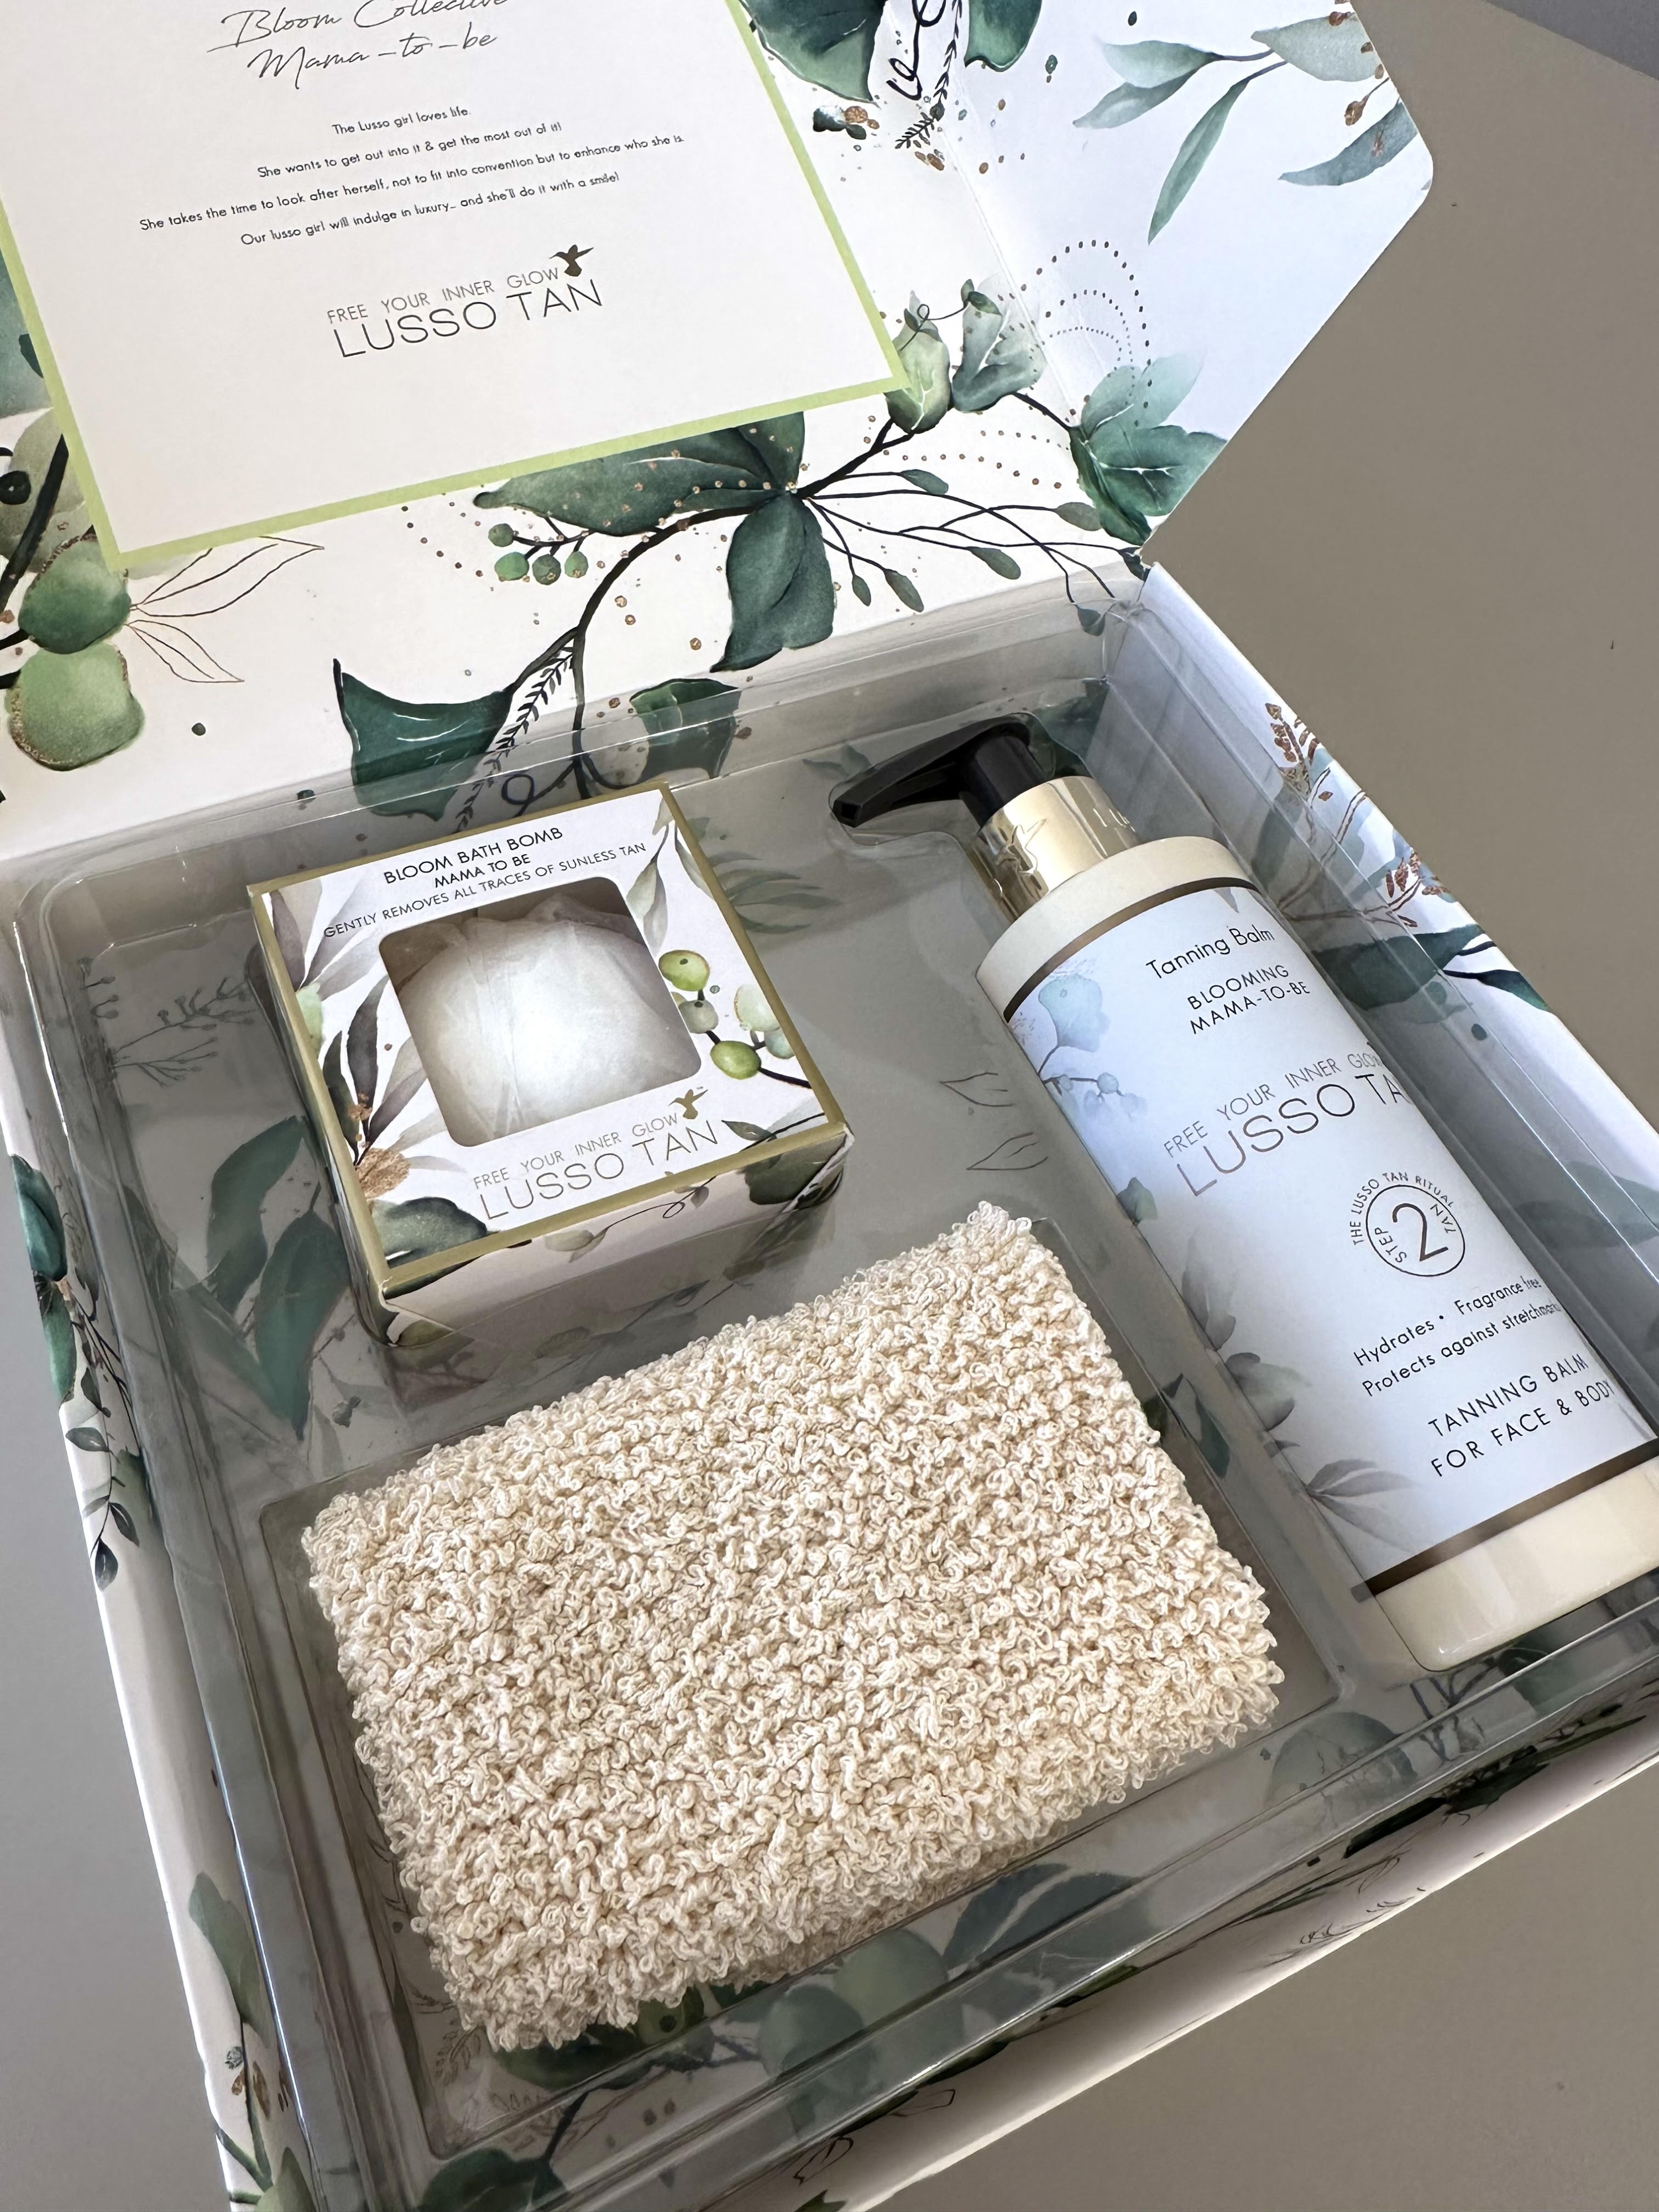 Lusso Tan Blooming Mama To Be Tanning Gift Set